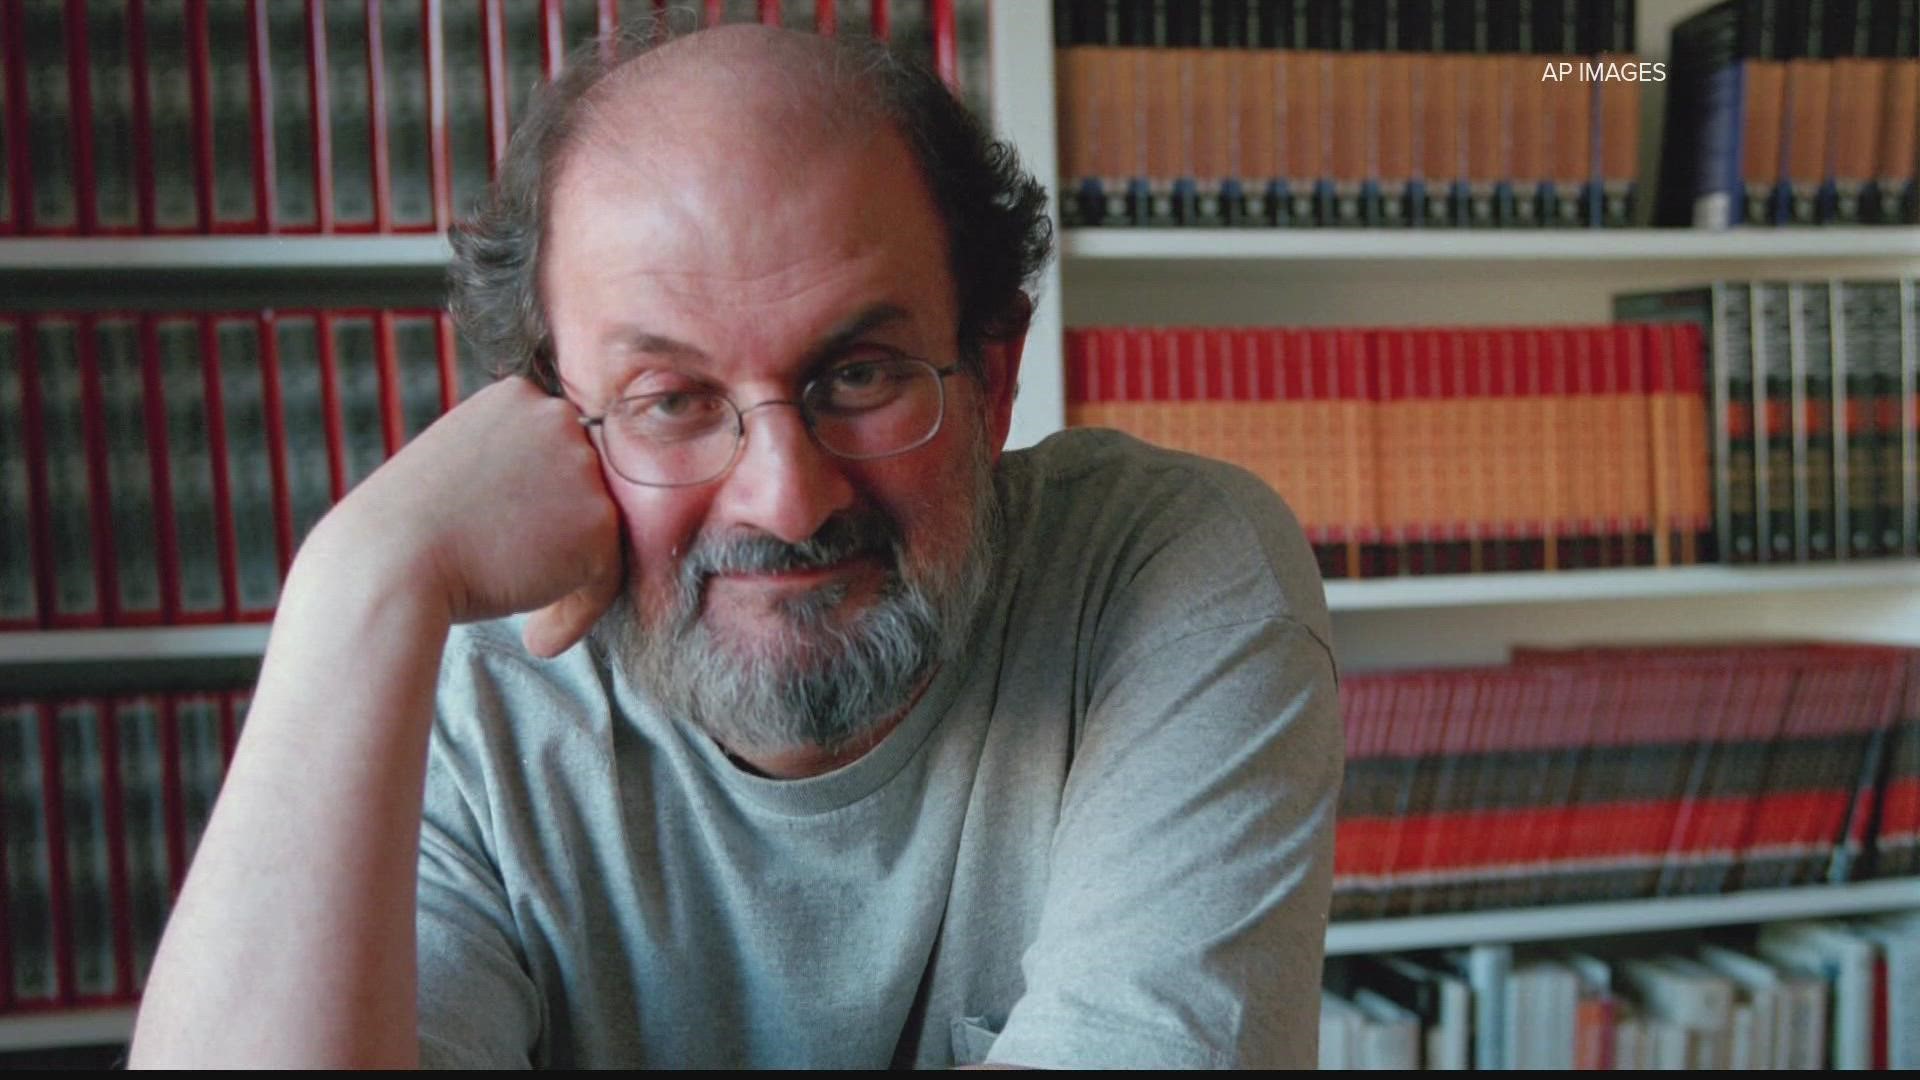 Salman Rushdie, whose novel “The Satanic Verses” drew death threats from Iran’s leader in the 1980s, was stabbed by a man who rushed the stage.